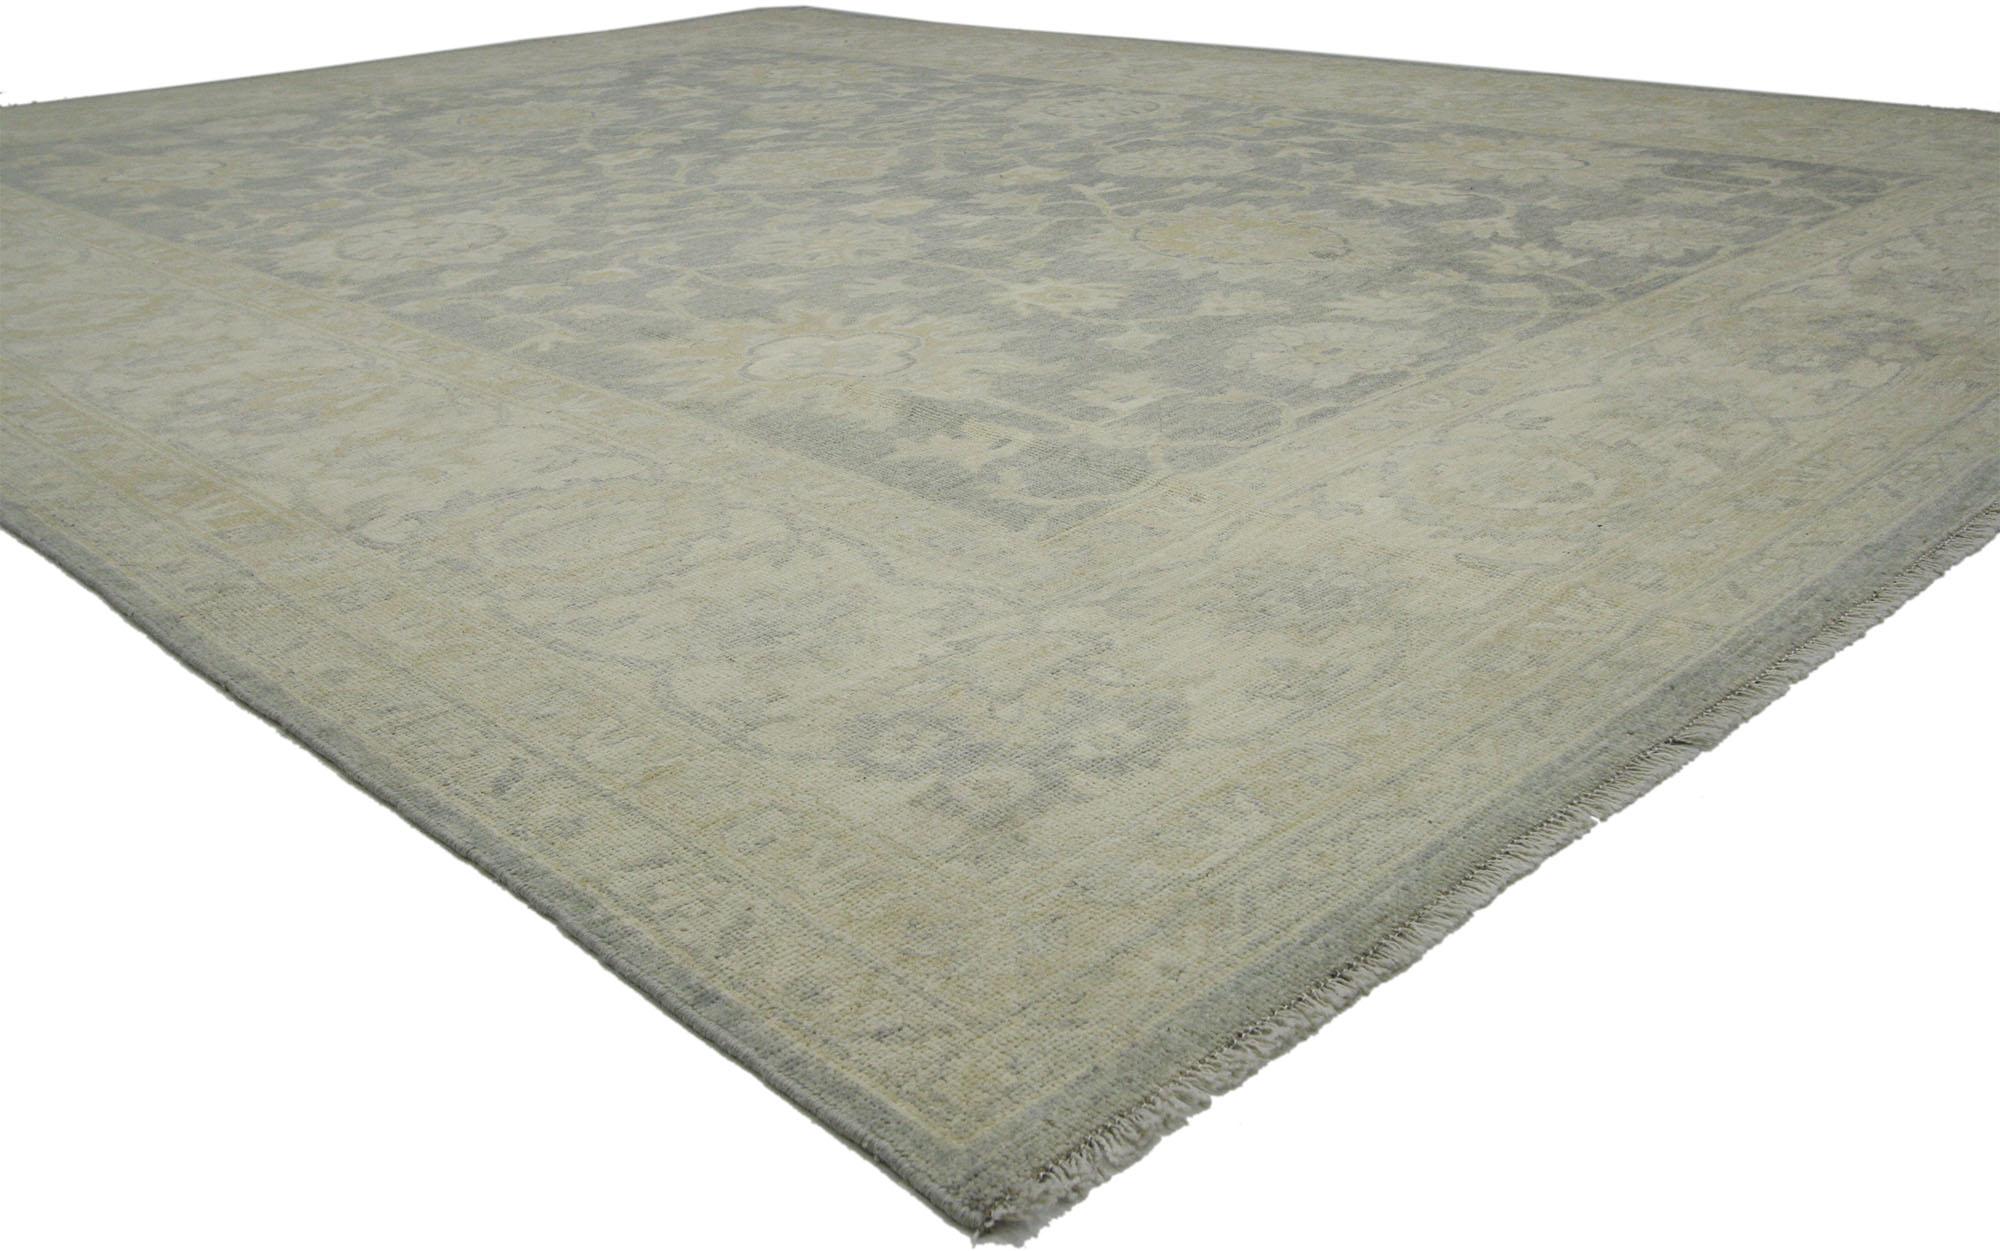 ??80213, new modern Transitional Oushak style area rug with neutral colors. This hand-knotted wool transitional Oushak style area rug features an all-over botanical pattern composed of Harshang motifs, blooming palmettes, flowers, and leafy tendrils